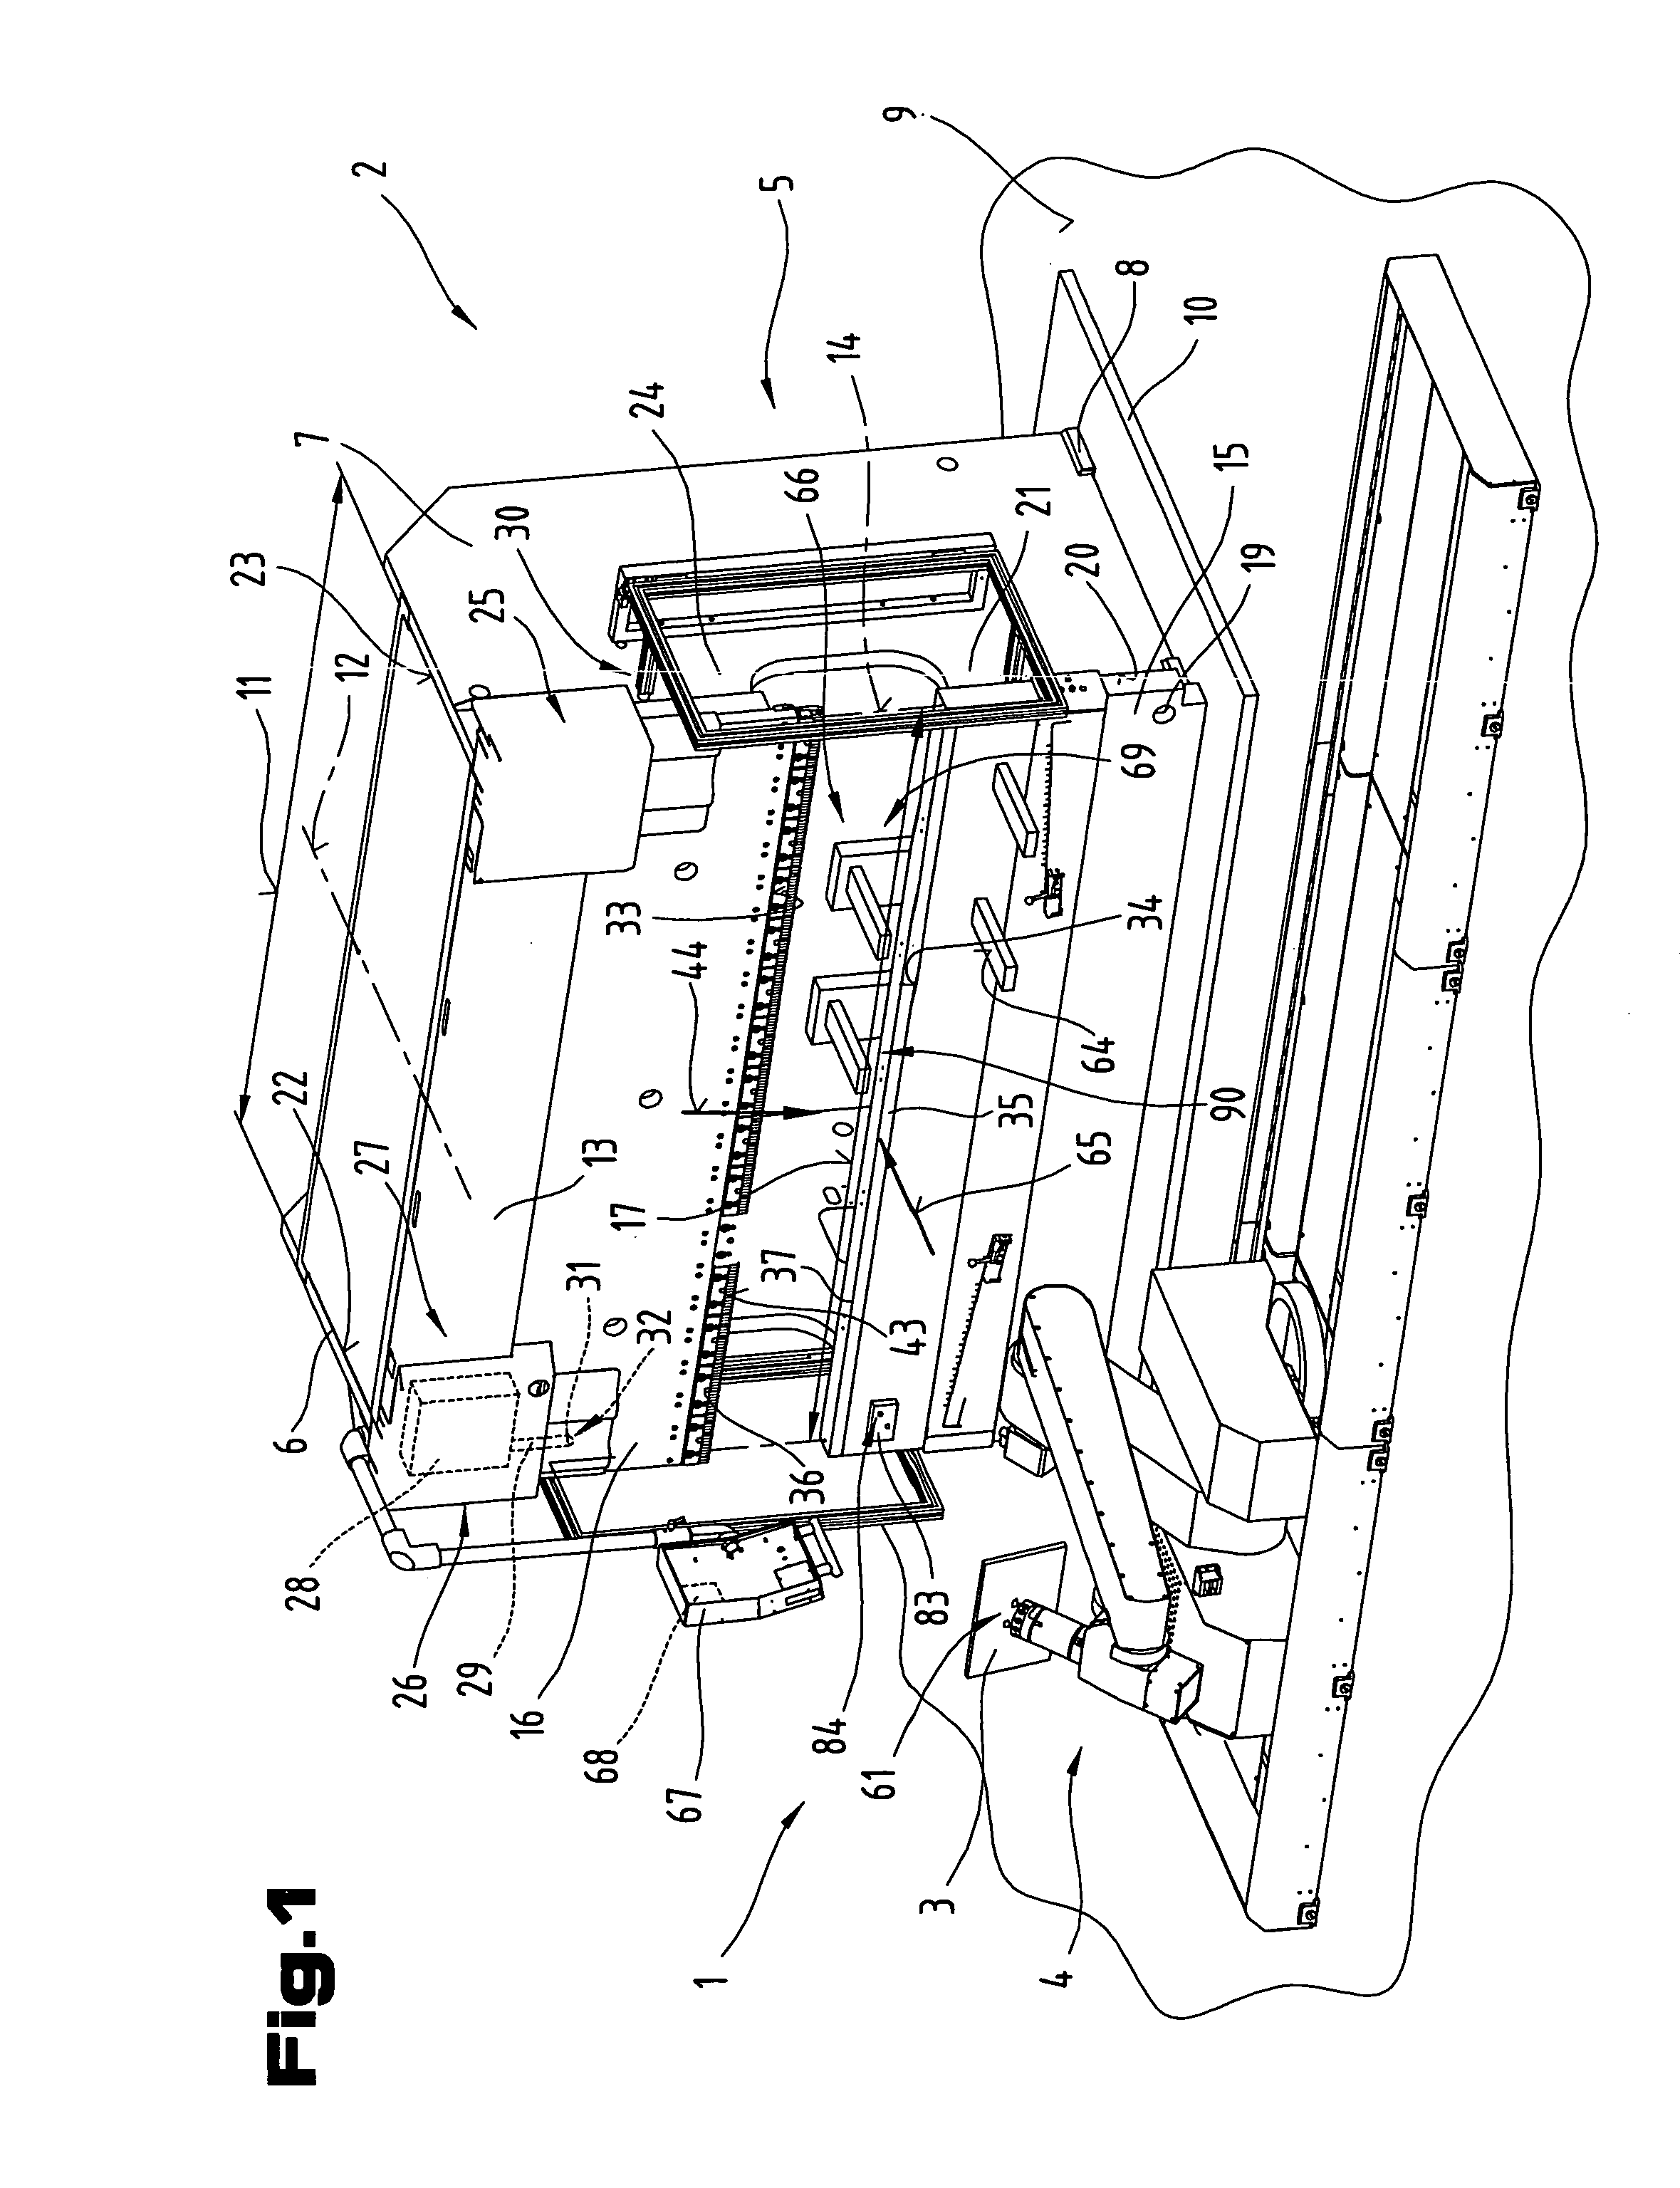 Production device, especially a bending press, and method for operating said production device